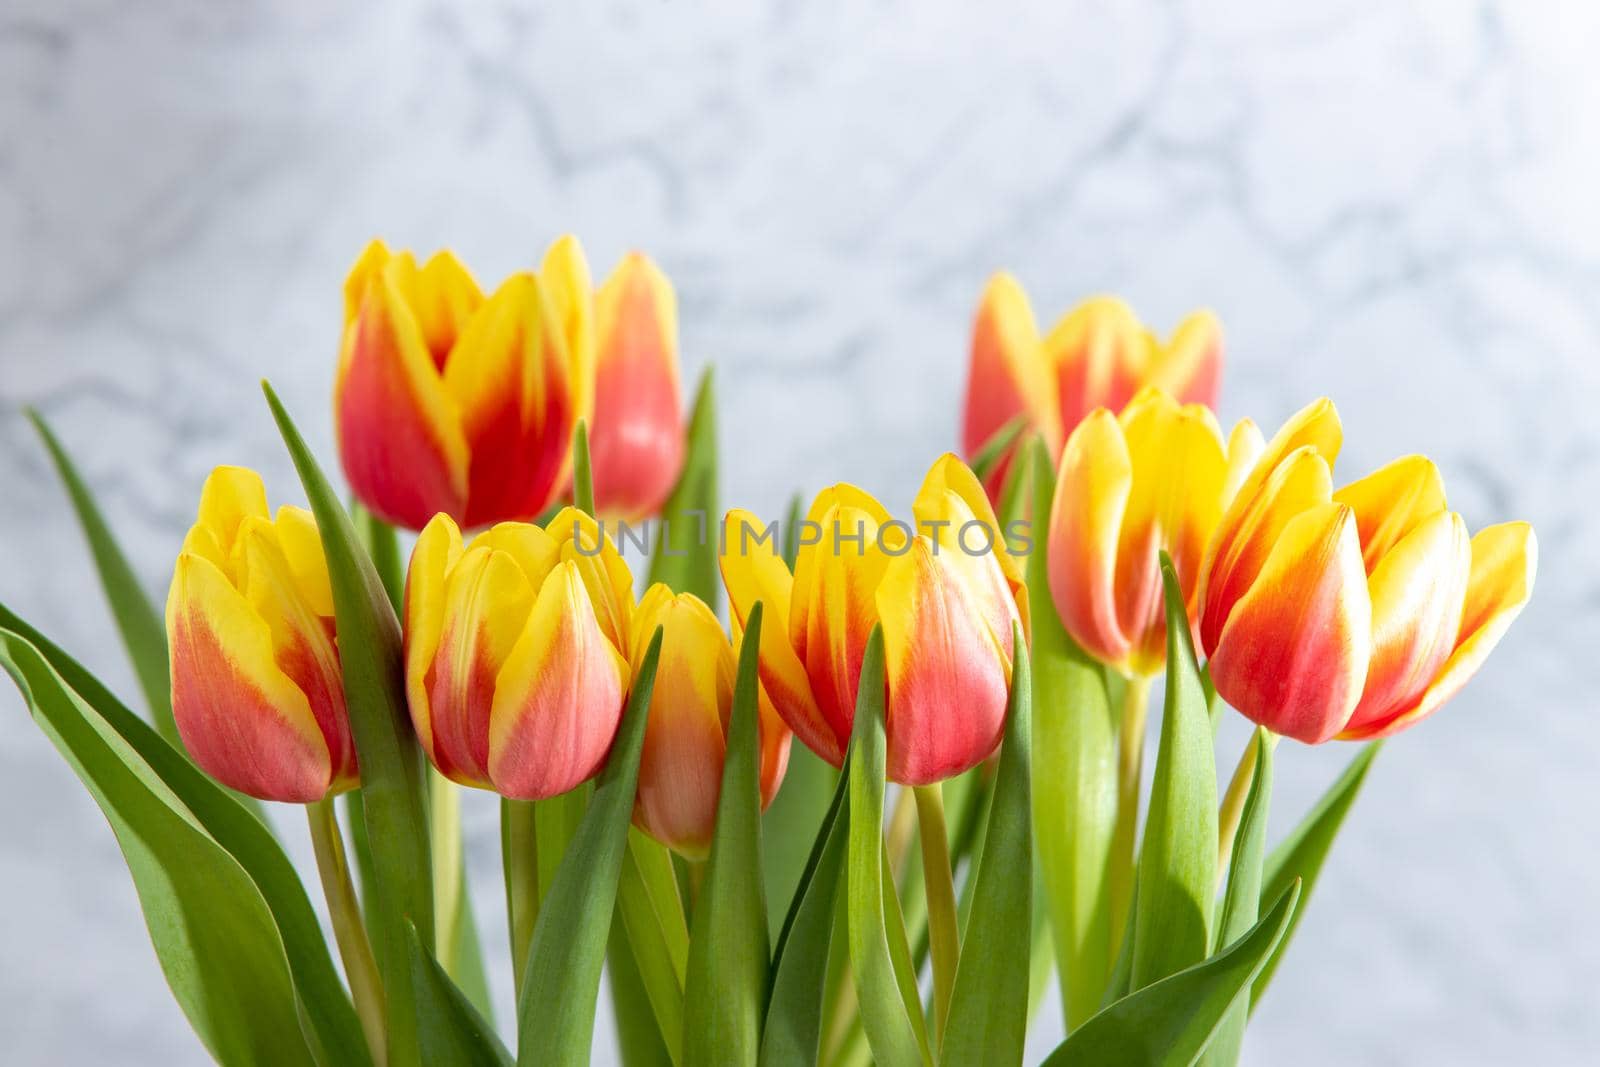 Bouquet with yellow red tulips  by reinerc